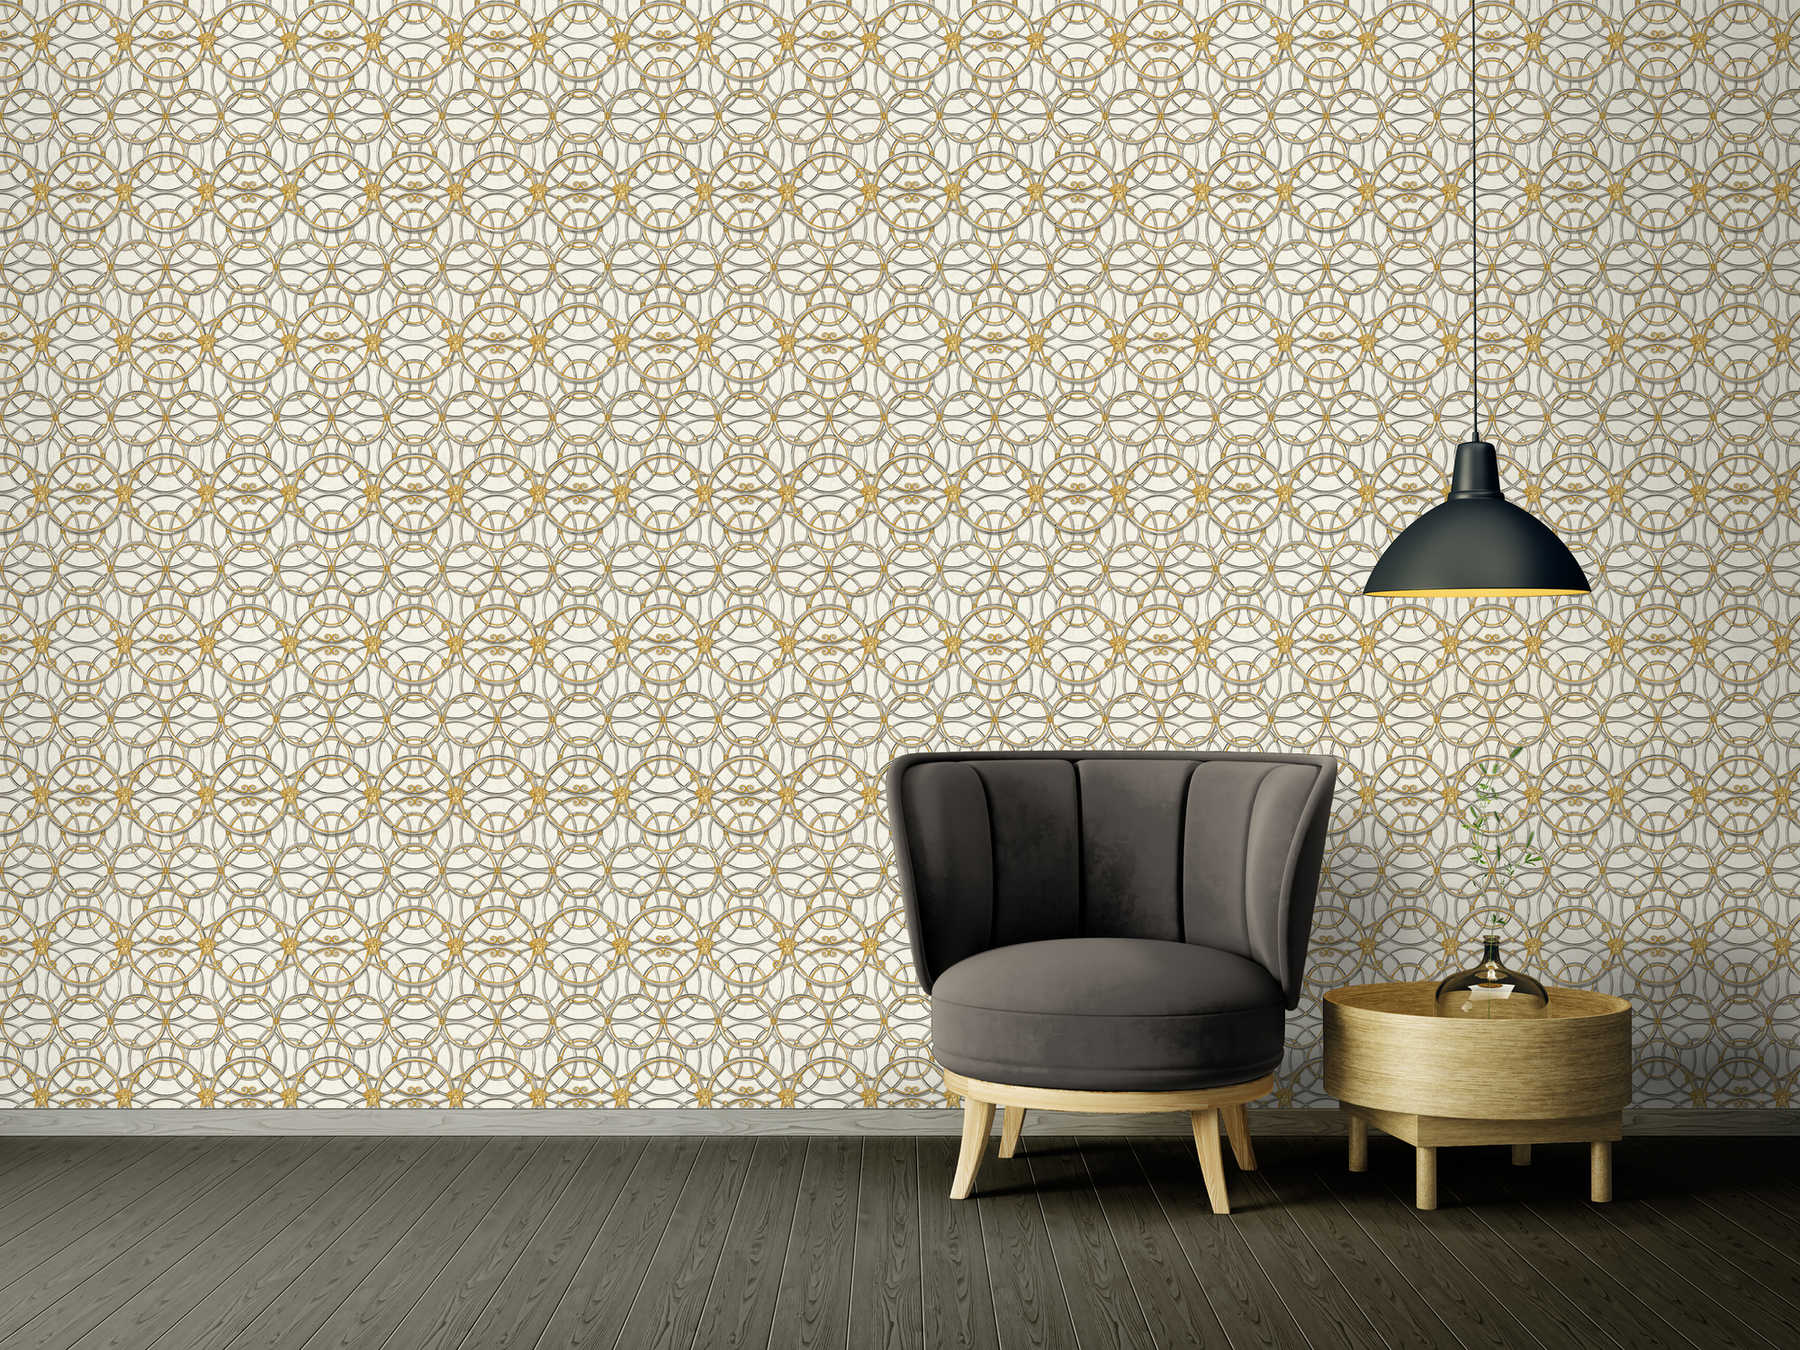             VERSACE Home wallpaper circle pattern and Medusa - gold, silver, white
        